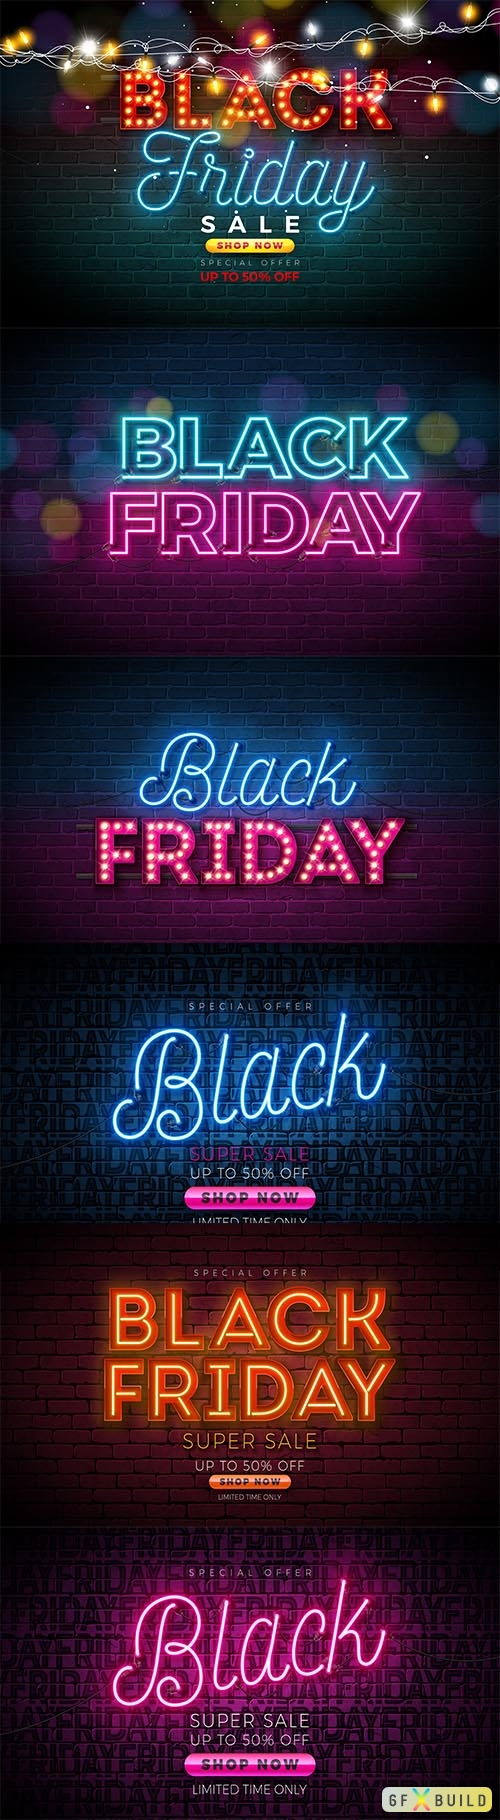 Neon black friday sale illustration with 3d lettering vector